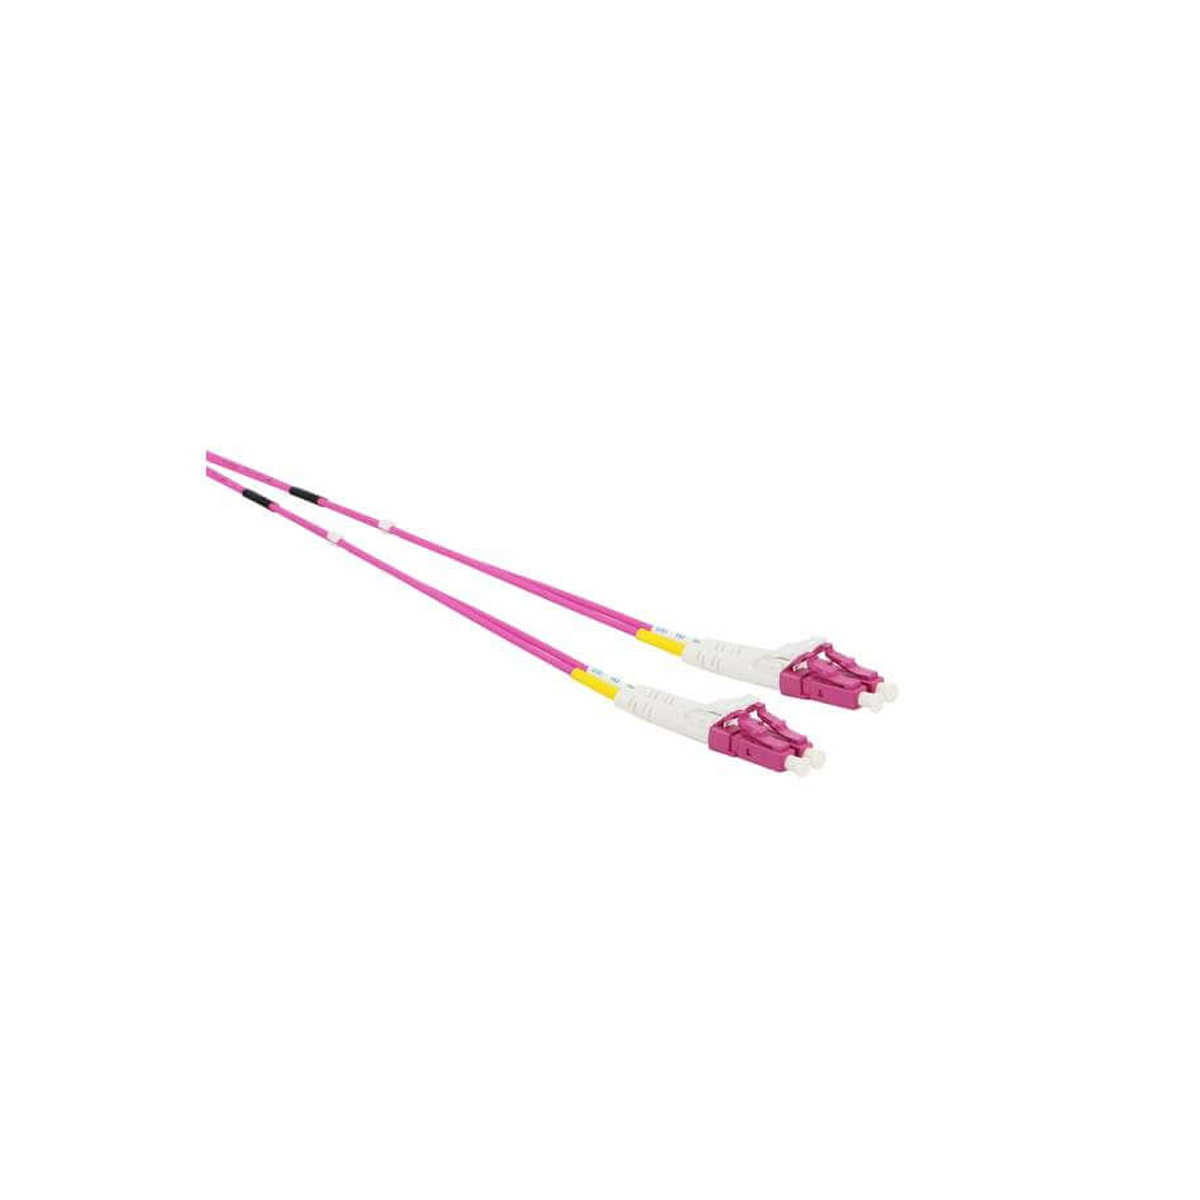 EXCEL OM4 1M LC-LC DUPLEX PATCH LEAD 50/125